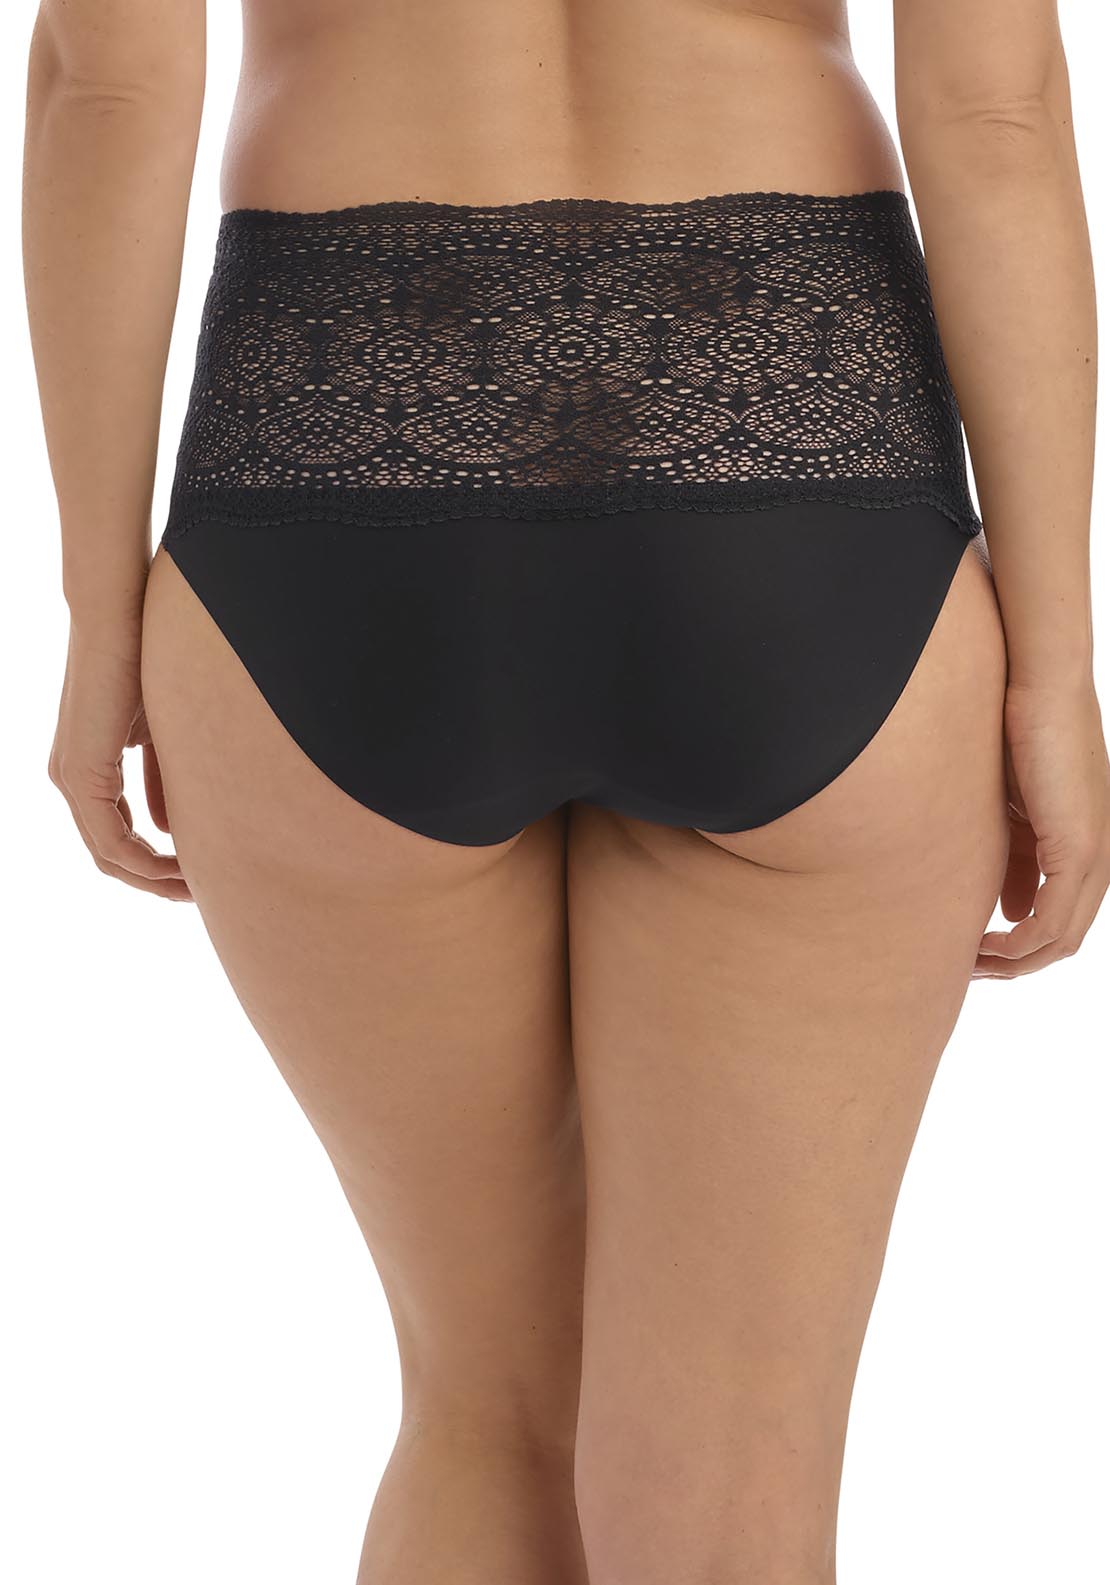 Fantasie Lace Ease Invisible Stretch Full Briefs - Black 4 Shaws Department Stores